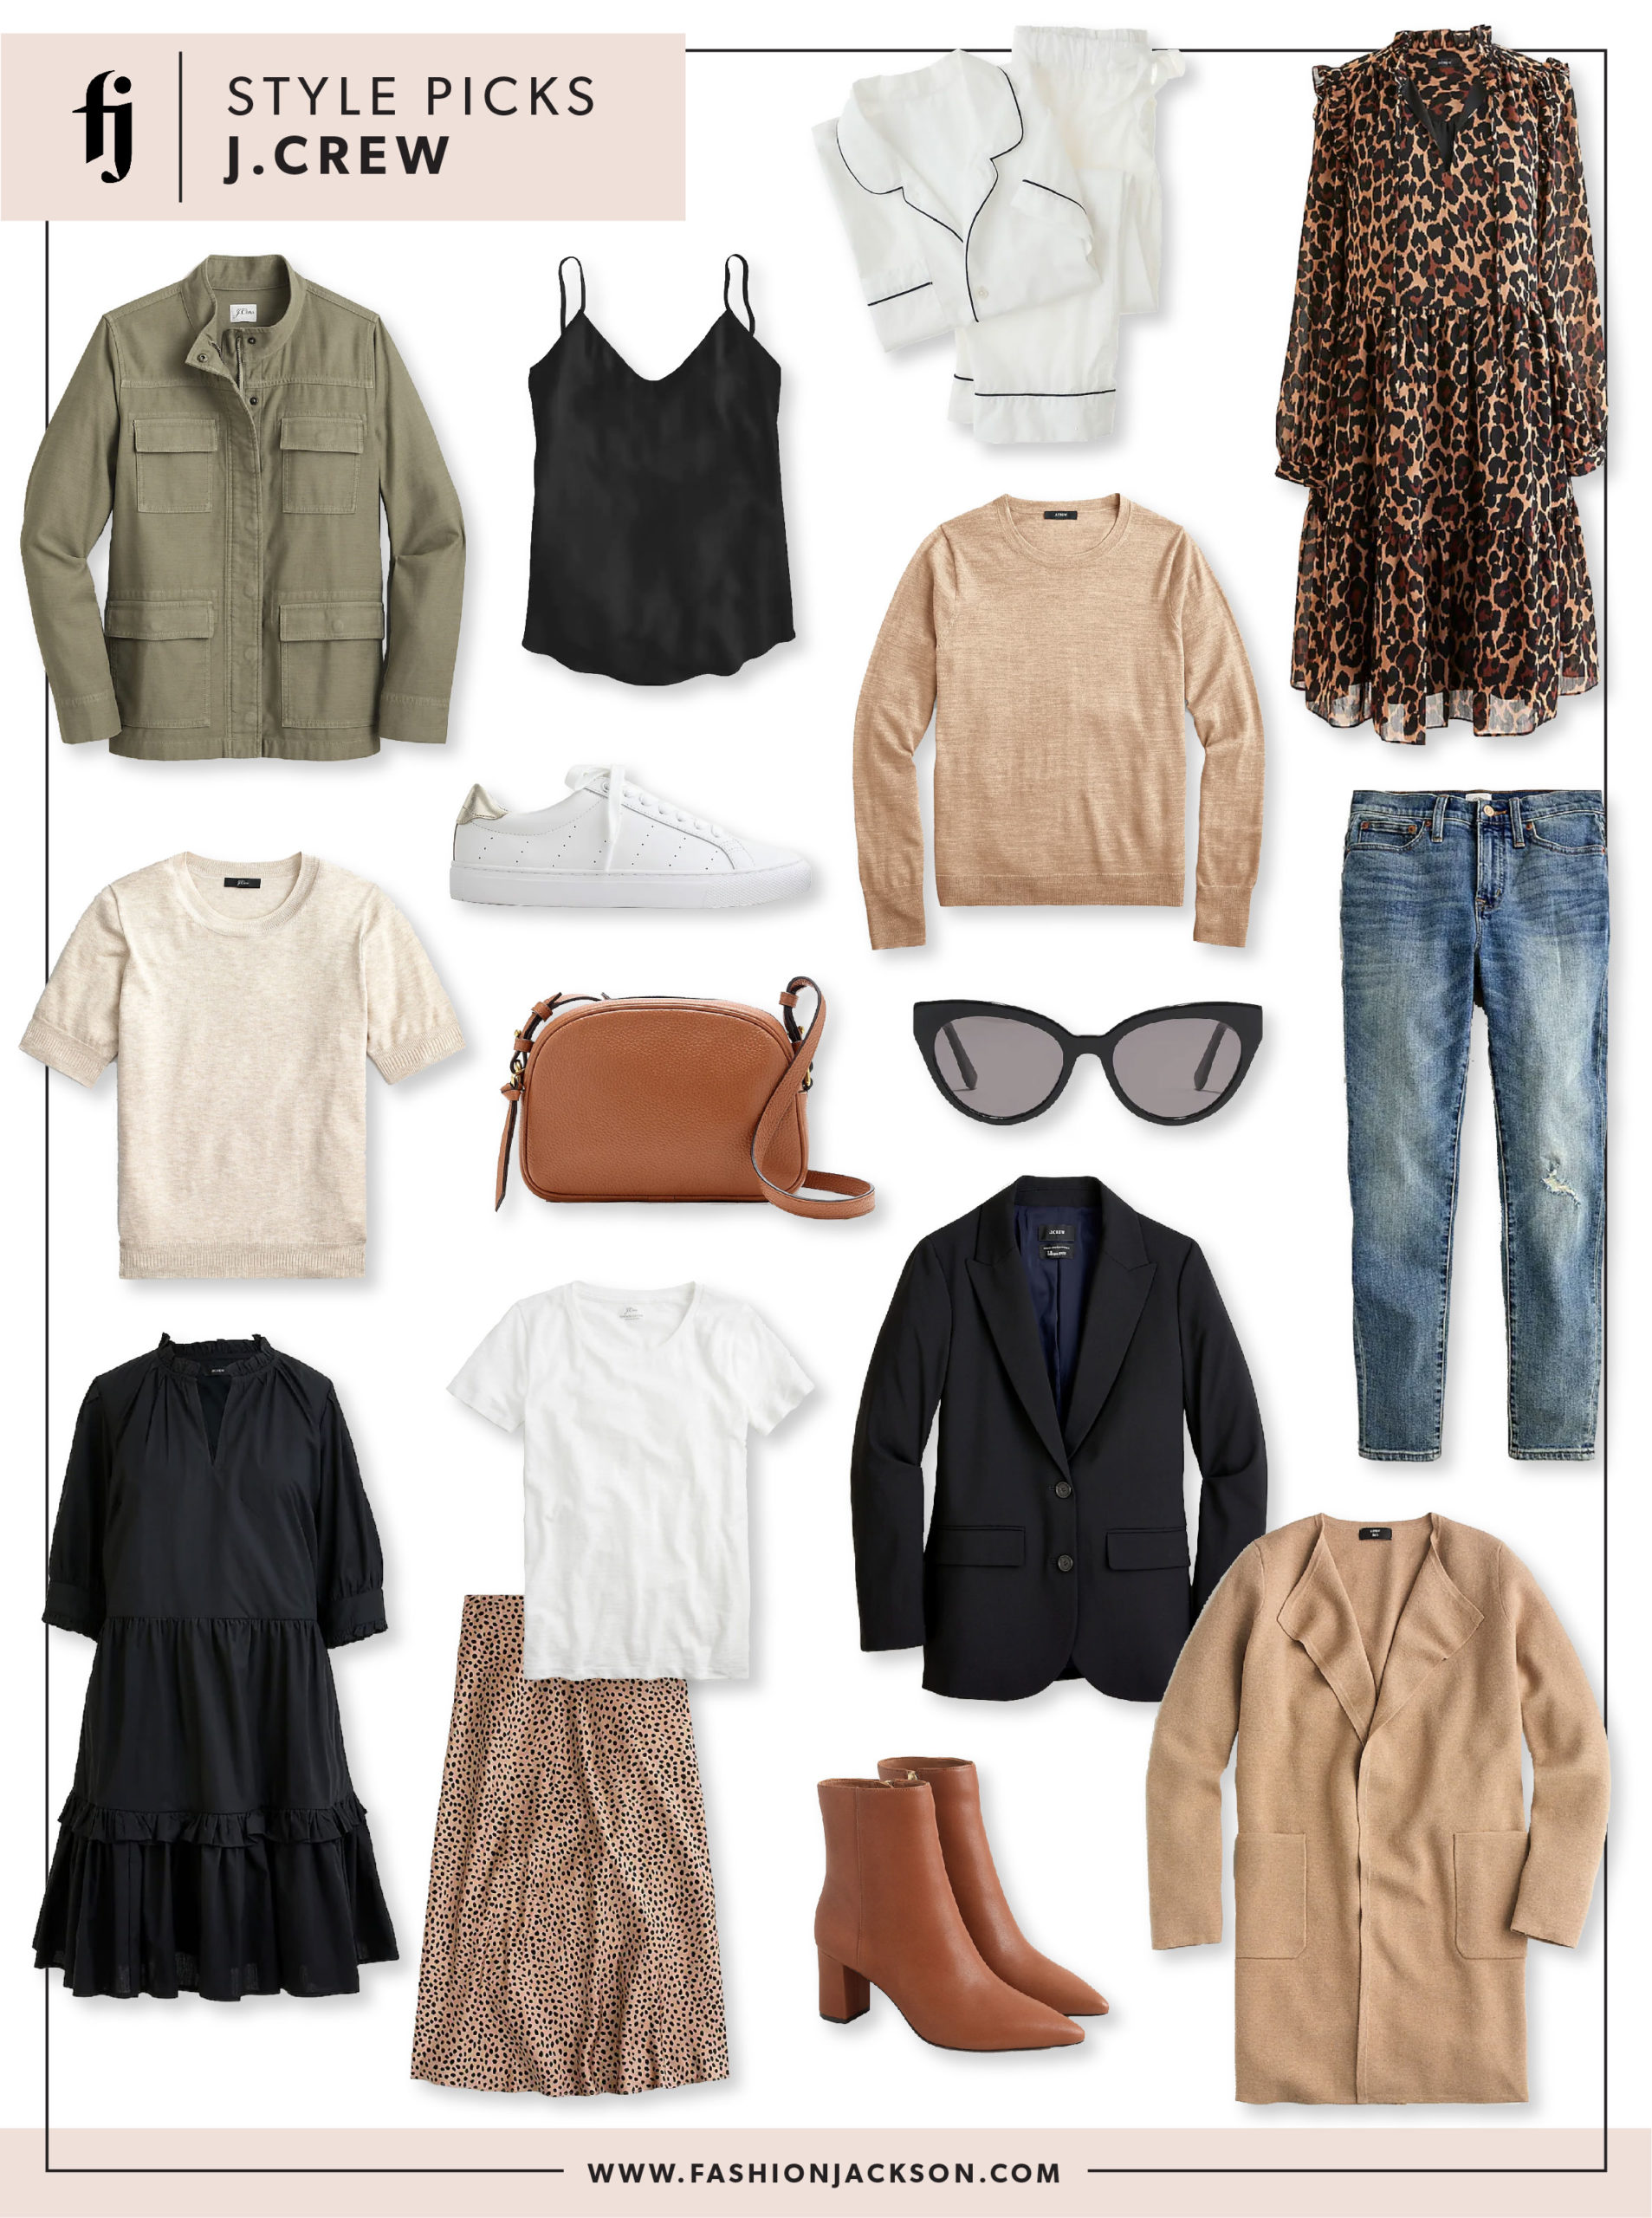 Jcrew Fall Outfits